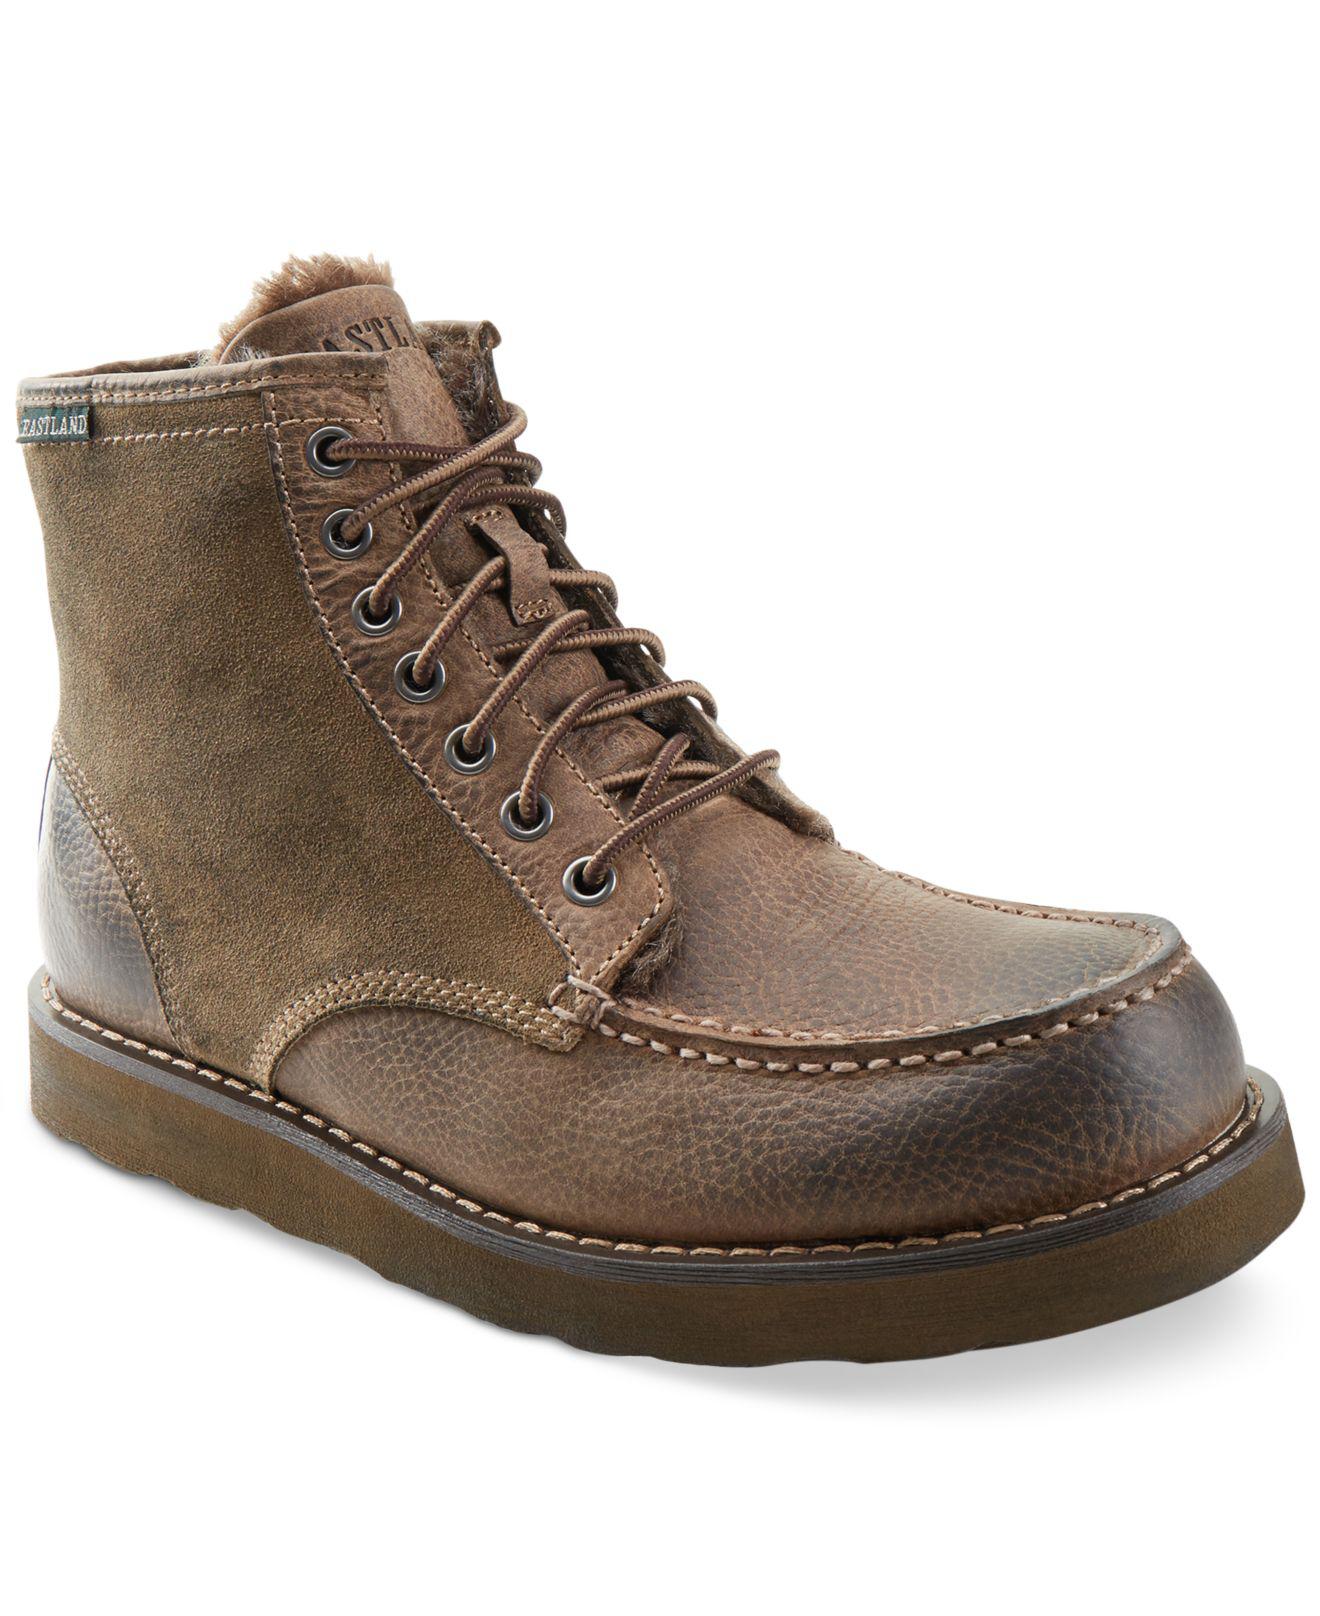 Eastland Leather Lumber Up Boots in Natural for Men - Lyst